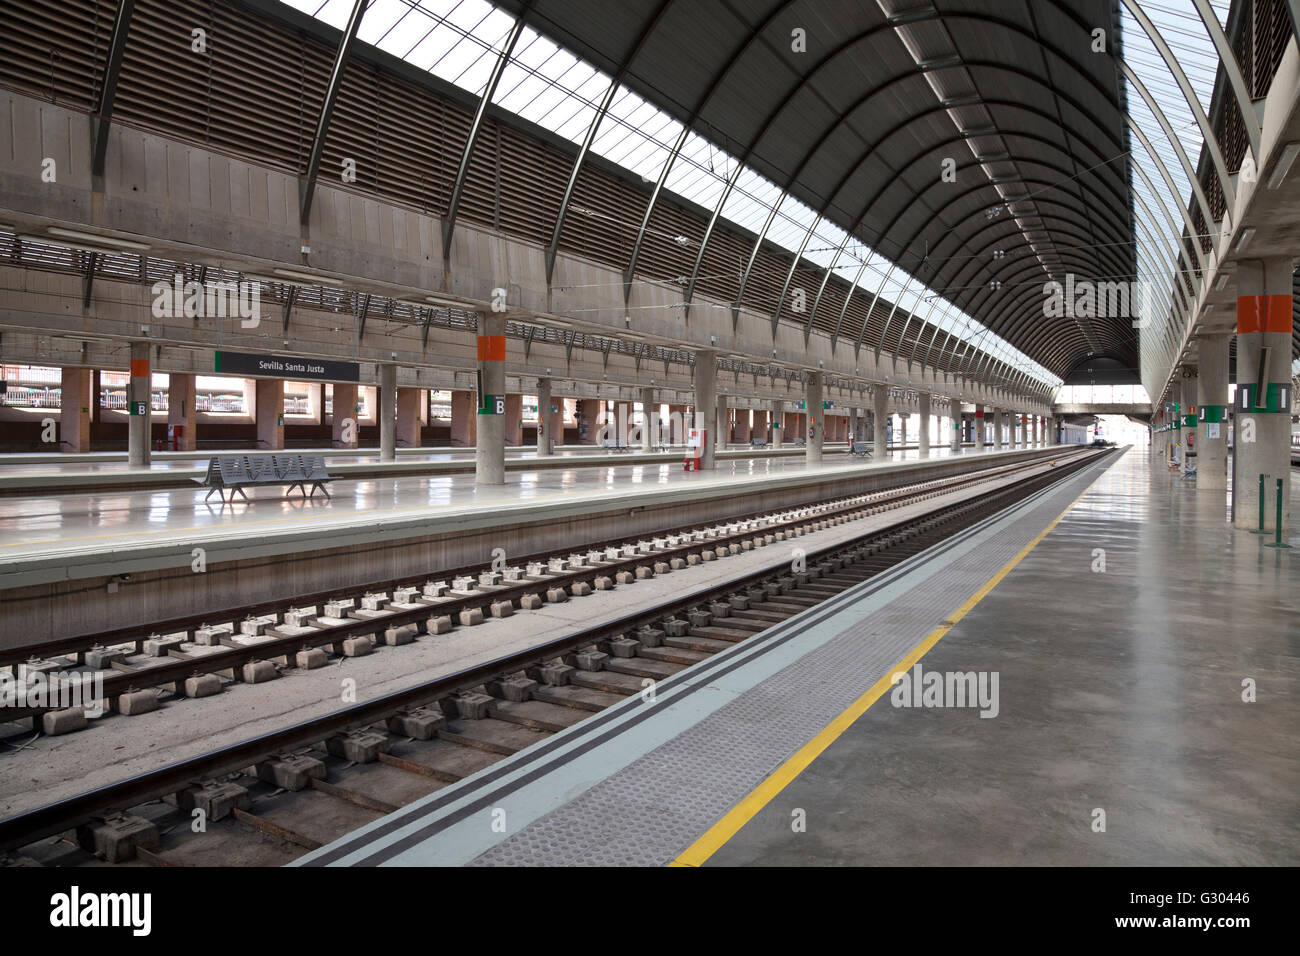 Santa justa station spain hires stock photography and images Alamy